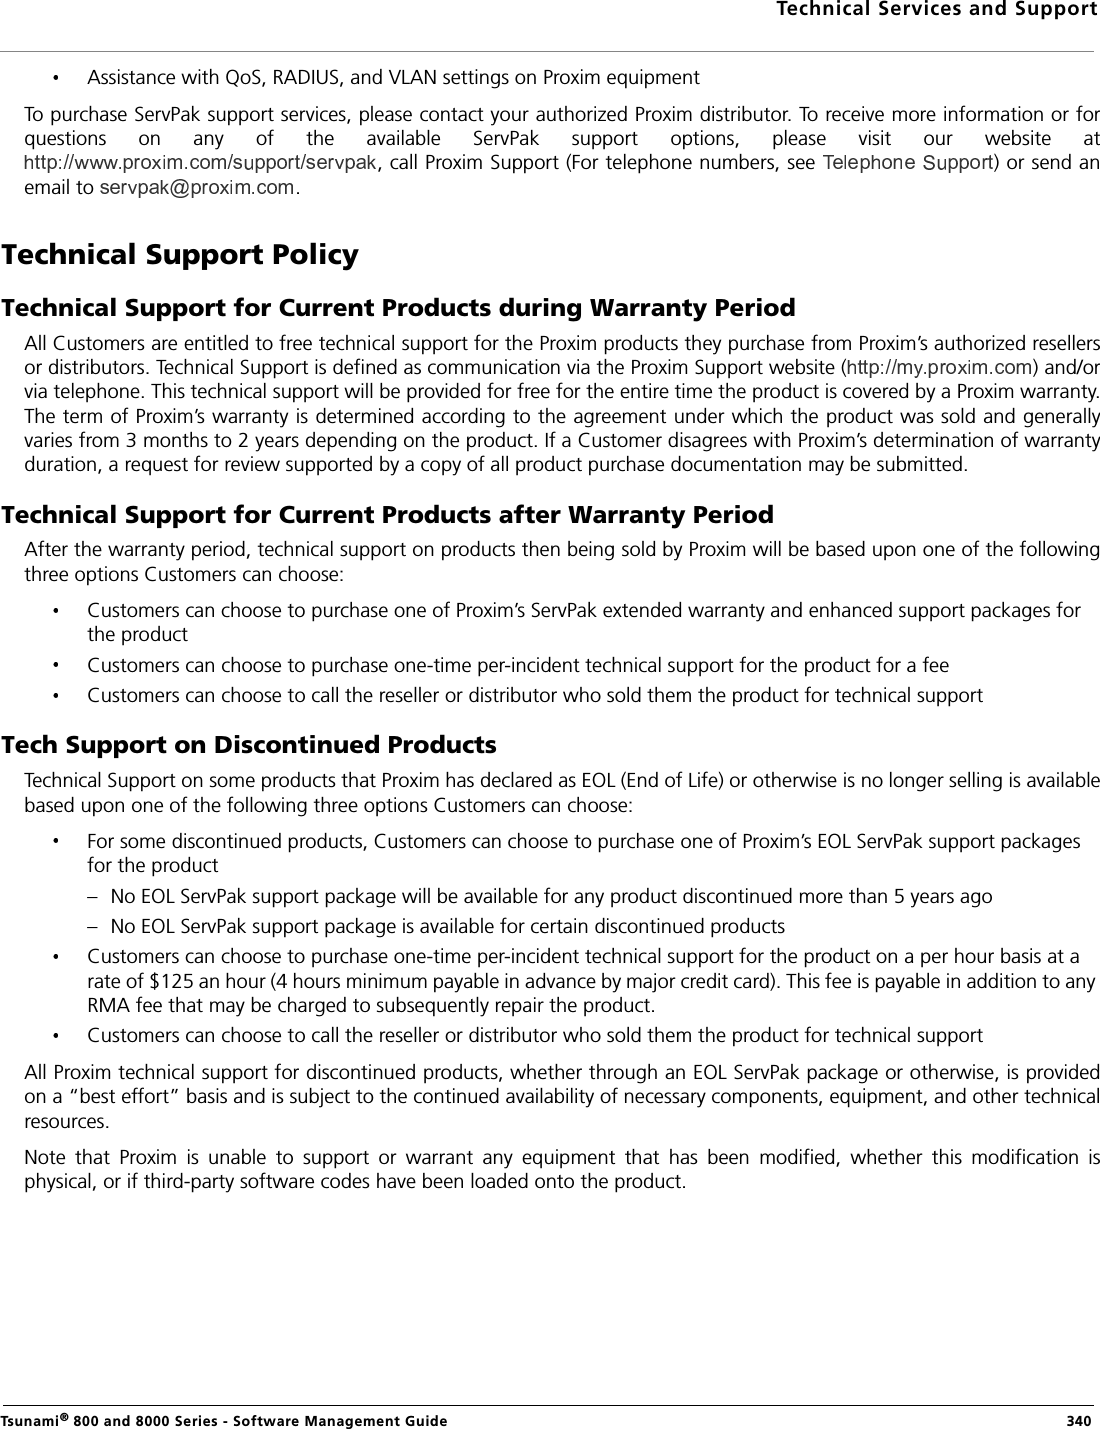 Technical Services and SupportTsunami® 800 and 8000 Series - Software Management Guide  340Assistance with QoS, RADIUS, and VLAN settings on Proxim equipmentTo purchase ServPak support services, please contact your authorized Proxim distributor. To receive more information or forquestions  on  any  of  the  available  ServPak  support  options,  please  visit  our  website  at, call Proxim Support (For telephone numbers, see  ) or send anemail to  .Technical Support PolicyTechnical Support for Current Products during Warranty PeriodAll Customers are entitled to free technical support for the Proxim products they purchase from Proxim’s authorized resellersor distributors. Technical Support is defined as communication via the Proxim Support website ( ) and/orvia telephone. This technical support will be provided for free for the entire time the product is covered by a Proxim warranty.The term of Proxim’s warranty is determined according to the agreement under which the product was sold and generallyvaries from 3 months to 2 years depending on the product. If a Customer disagrees with Proxim’s determination of warrantyduration, a request for review supported by a copy of all product purchase documentation may be submitted.Technical Support for Current Products after Warranty PeriodAfter the warranty period, technical support on products then being sold by Proxim will be based upon one of the followingthree options Customers can choose:Customers can choose to purchase one of Proxim’s ServPak extended warranty and enhanced support packages for the productCustomers can choose to purchase one-time per-incident technical support for the product for a fee Customers can choose to call the reseller or distributor who sold them the product for technical supportTech Support on Discontinued ProductsTechnical Support on some products that Proxim has declared as EOL (End of Life) or otherwise is no longer selling is availablebased upon one of the following three options Customers can choose:For some discontinued products, Customers can choose to purchase one of Proxim’s EOL ServPak support packages for the product– No EOL ServPak support package will be available for any product discontinued more than 5 years ago– No EOL ServPak support package is available for certain discontinued productsCustomers can choose to purchase one-time per-incident technical support for the product on a per hour basis at a rate of $125 an hour (4 hours minimum payable in advance by major credit card). This fee is payable in addition to any RMA fee that may be charged to subsequently repair the product.Customers can choose to call the reseller or distributor who sold them the product for technical supportAll Proxim technical support for discontinued products, whether through an EOL ServPak package or otherwise, is providedon a “best effort” basis and is subject to the continued availability of necessary components, equipment, and other technicalresources.Note  that  Proxim  is  unable  to  support  or  warrant  any  equipment  that  has  been  modified,  whether  this  modification  isphysical, or if third-party software codes have been loaded onto the product.